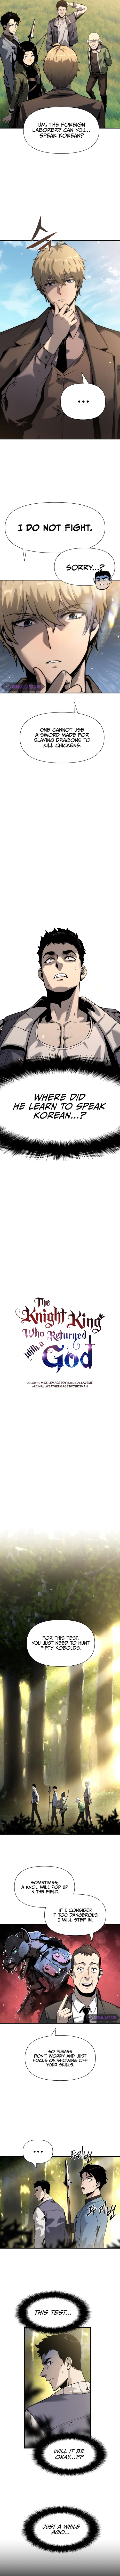 The Knight King Who Returned with a God chapter 10